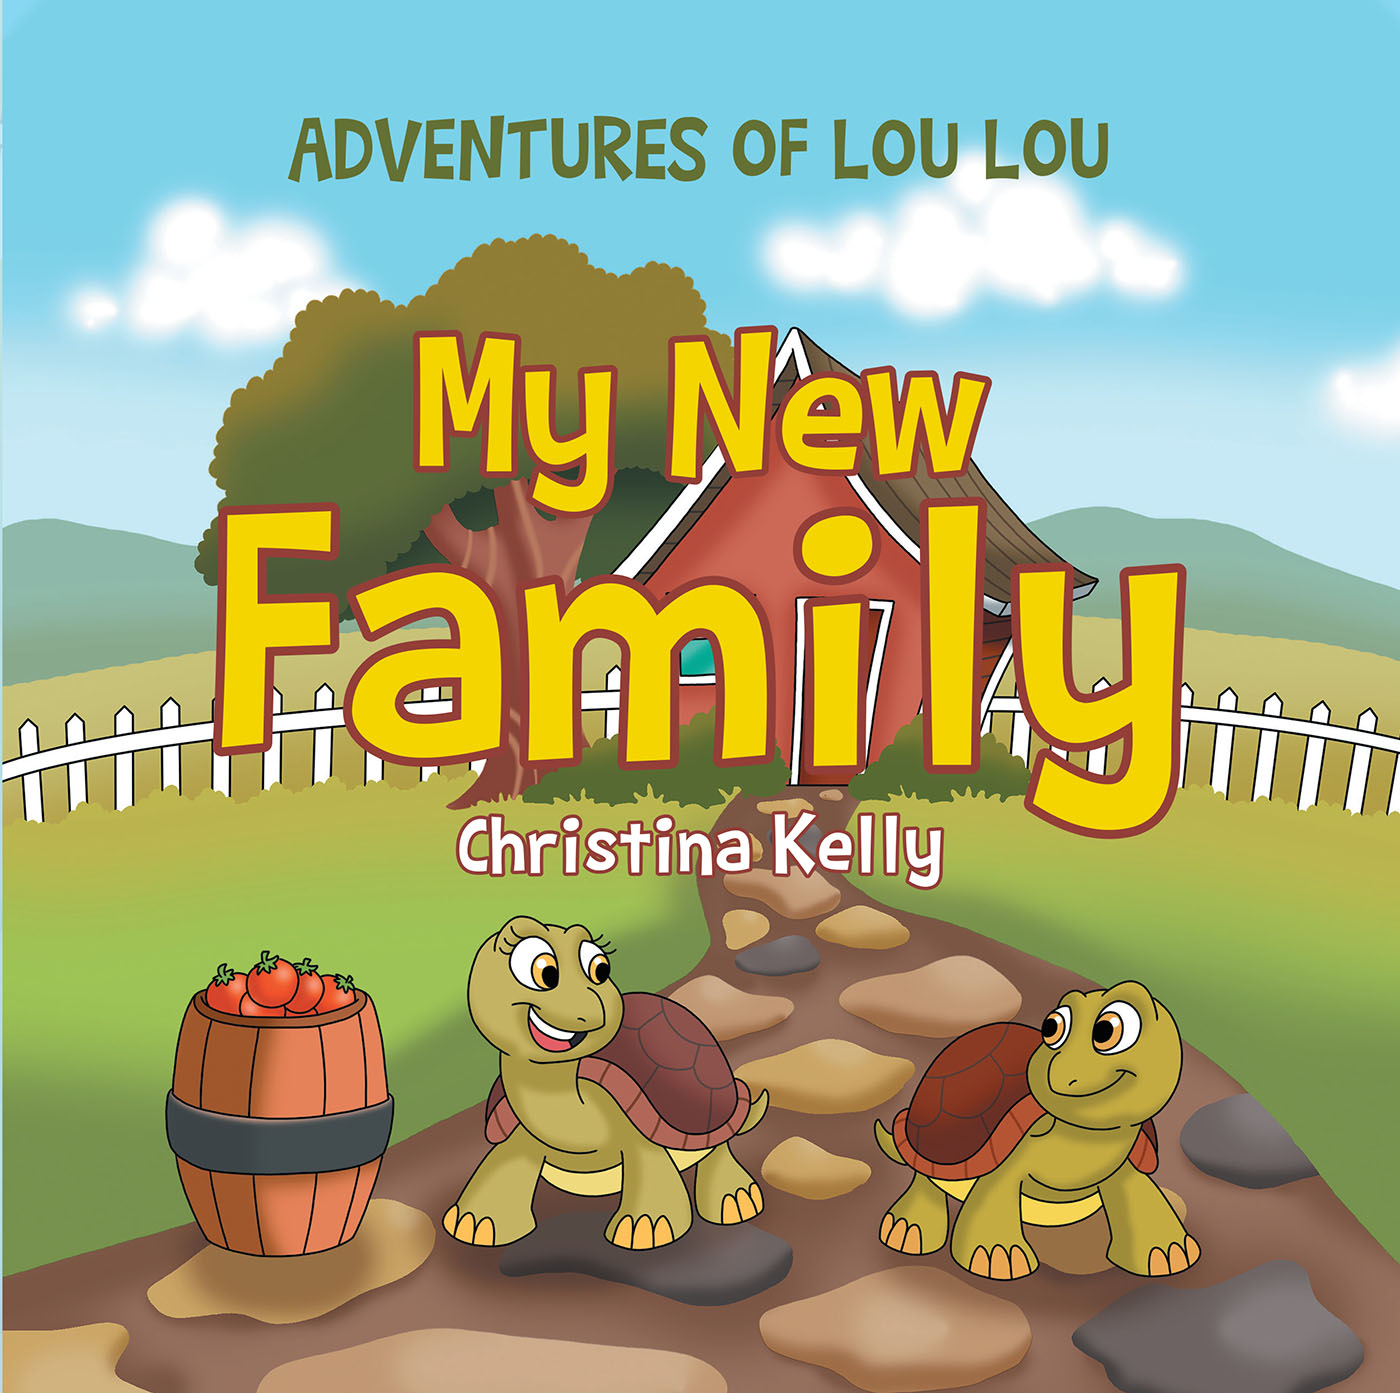 Author Christina Kelly’s New Book, "My New Family," is the Adorable Story of Two Tortoises Who Are Filled with Excitement and Joy as They Get Ready for Their New Homes